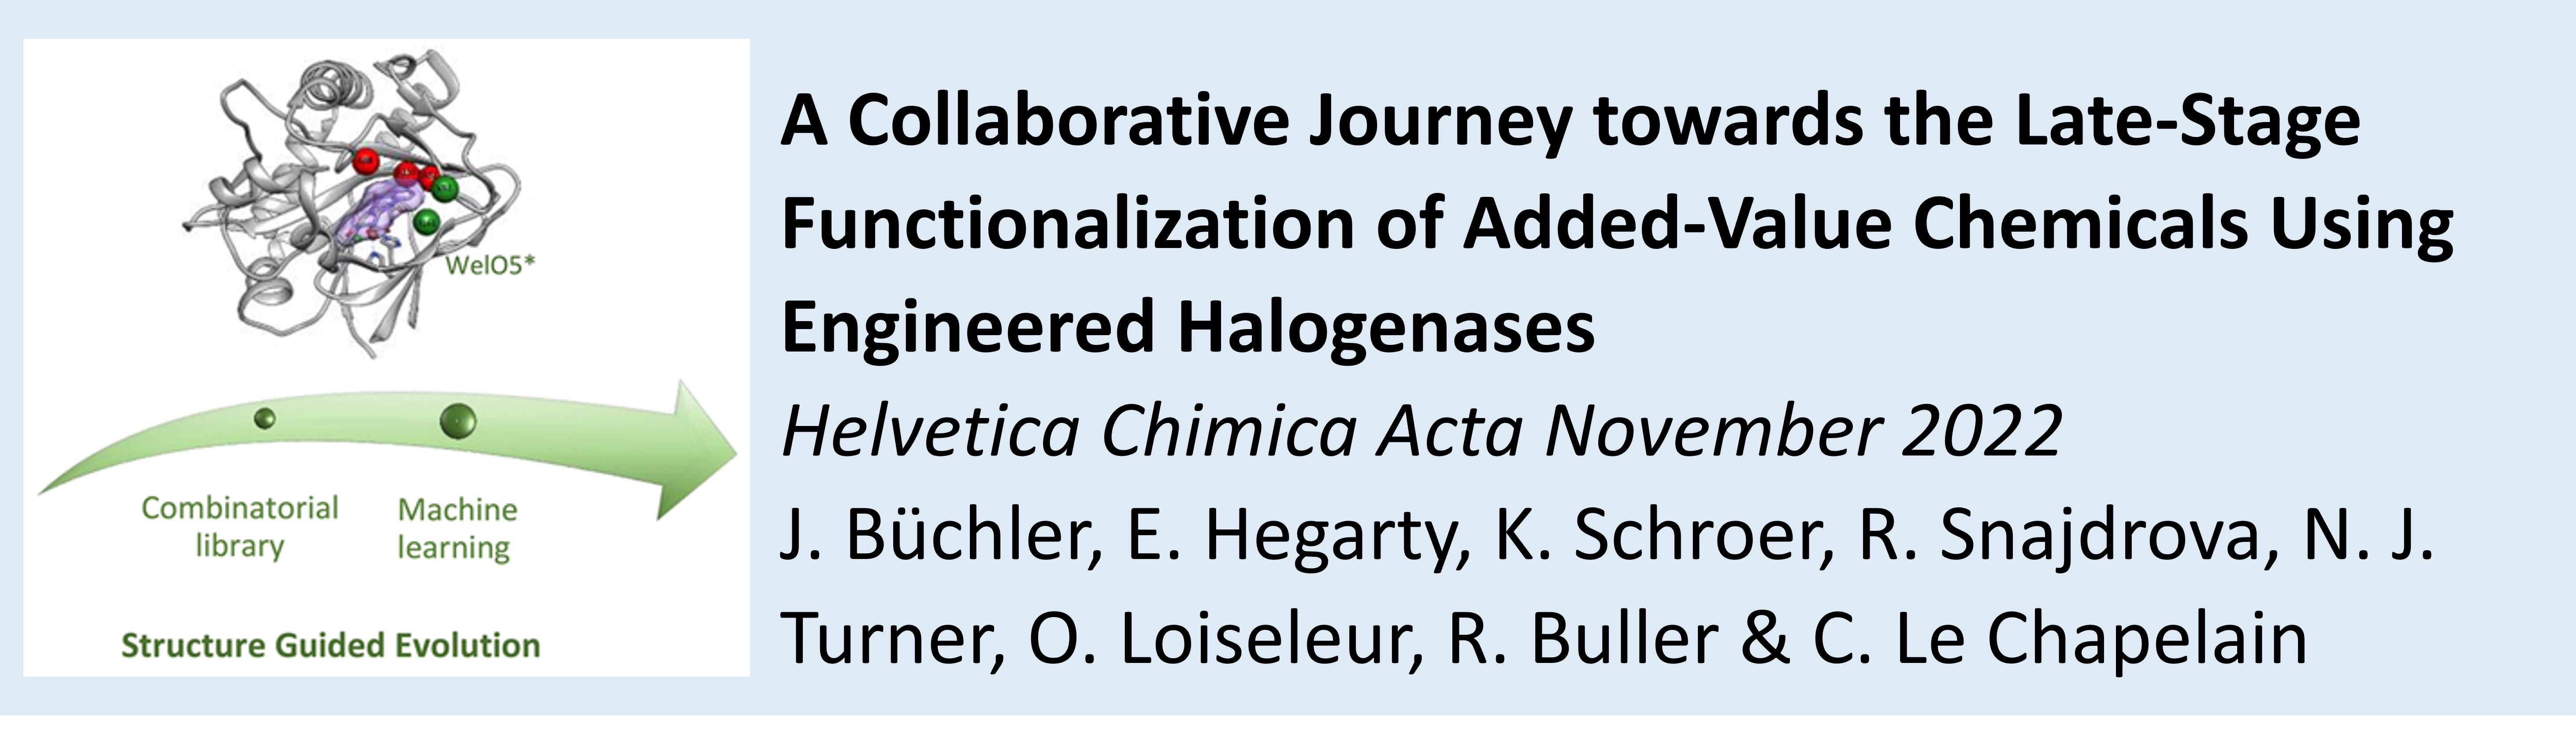 Late-Stage Functionalization of Added-Value Chemicals Using Engineered Halogenases (Article)